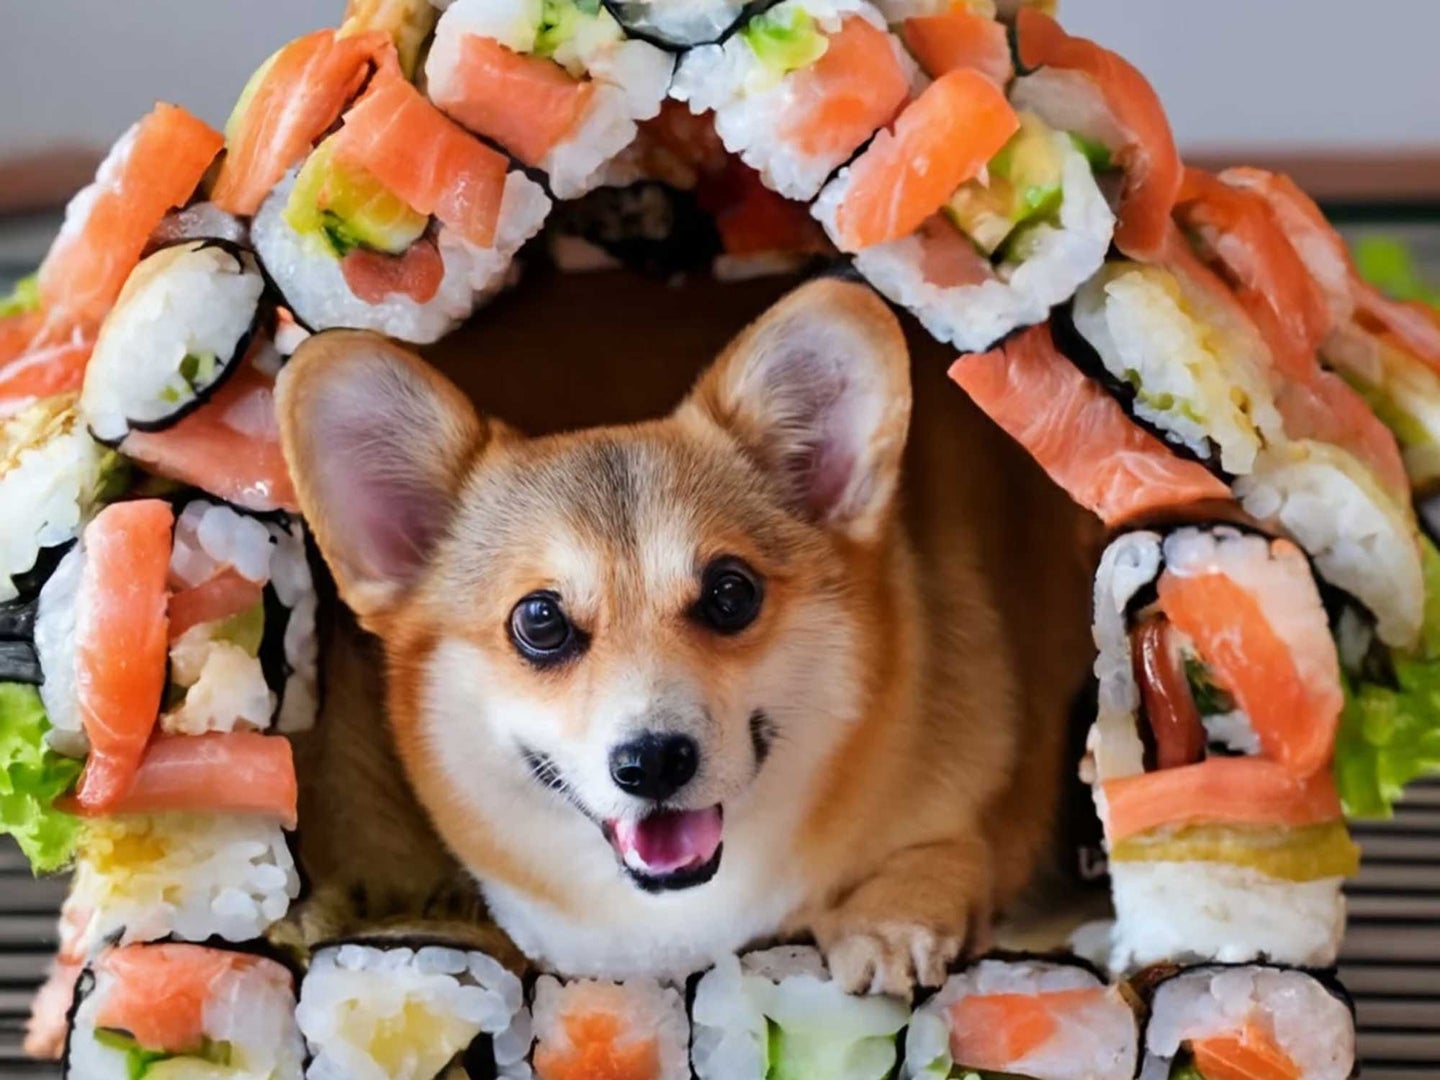 A dog in a sushi house